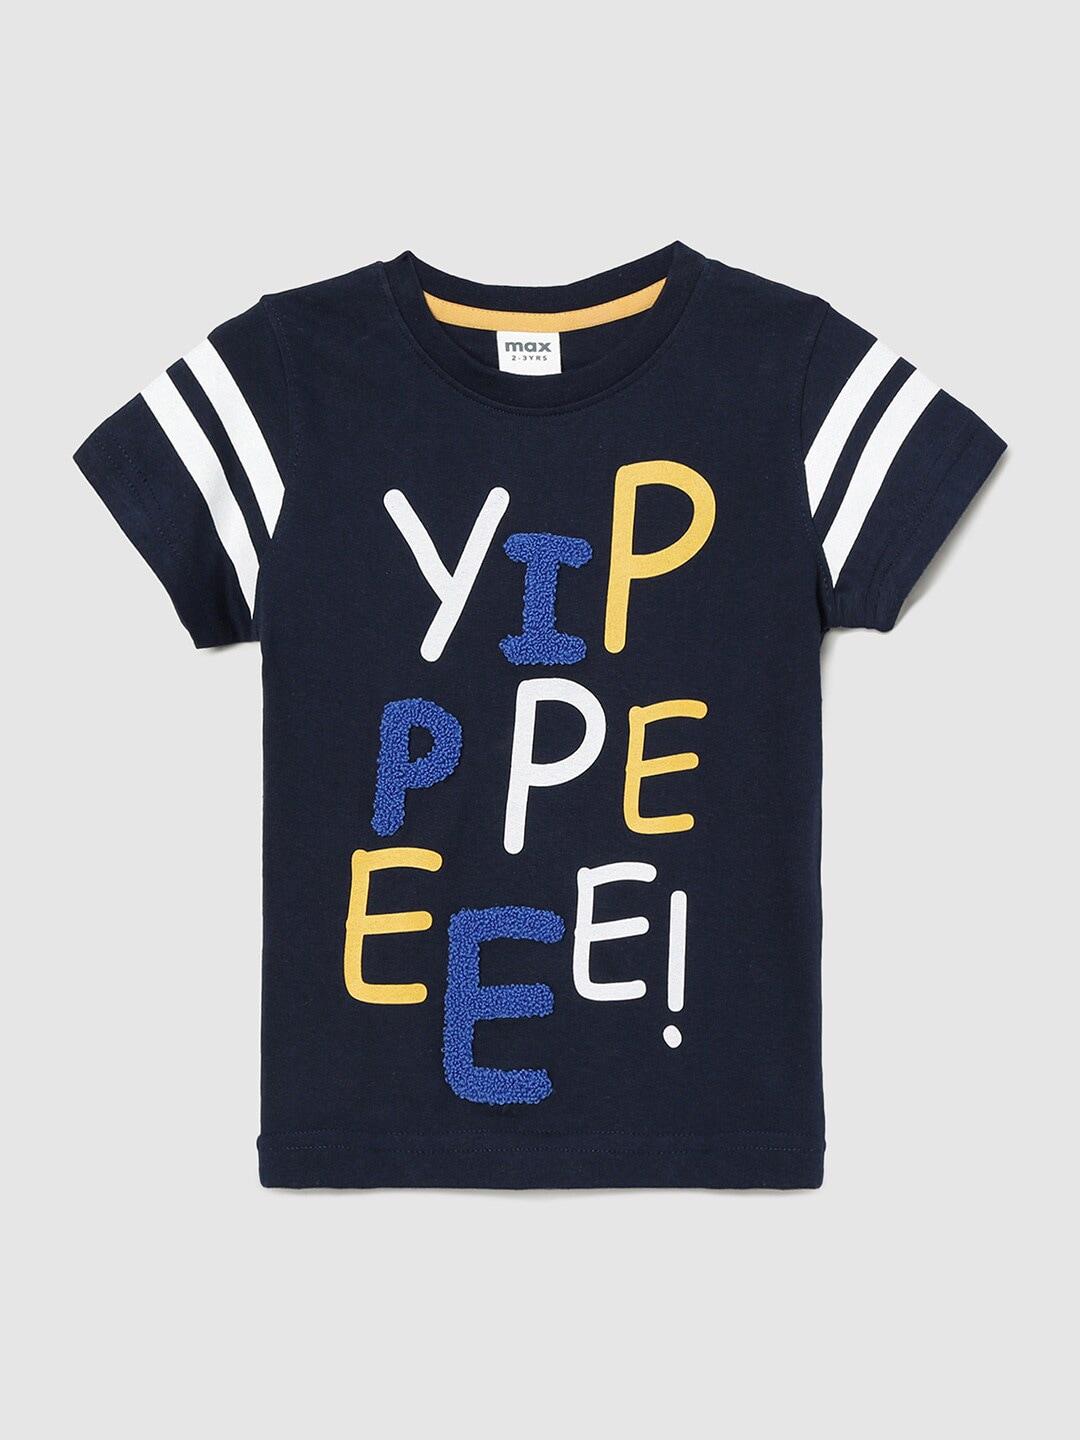 max Boys Navy Blue Typography Printed Pure Cotton T-shirt